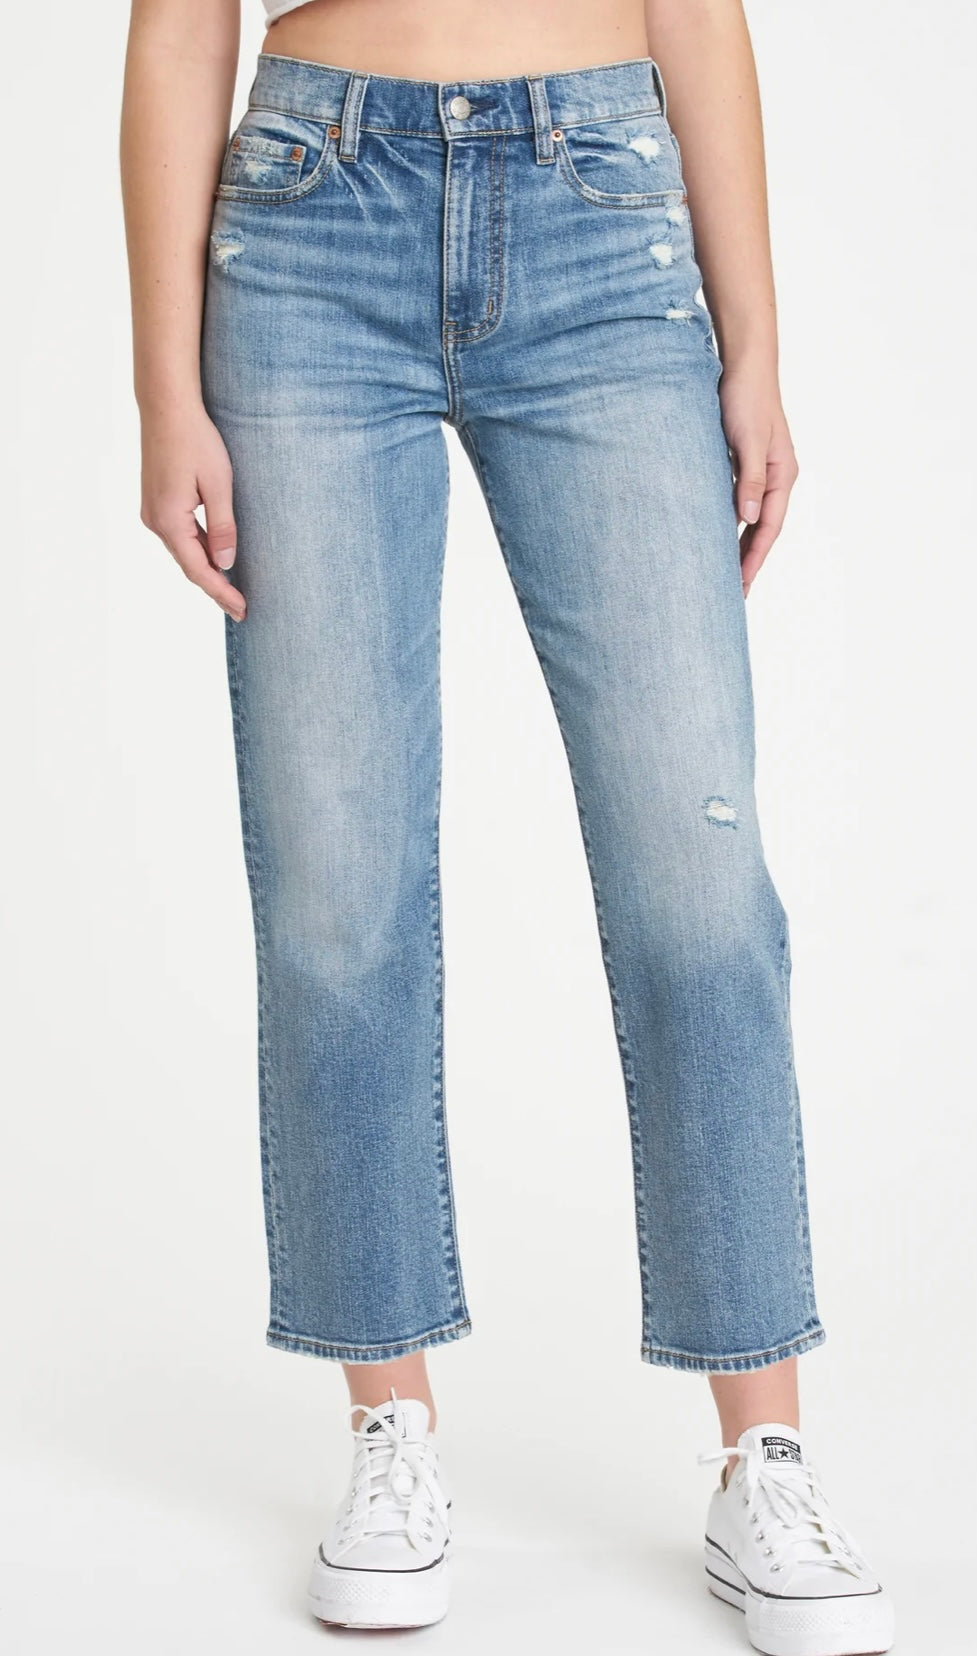 Straight Up High Rise Jean in Totally Buggin